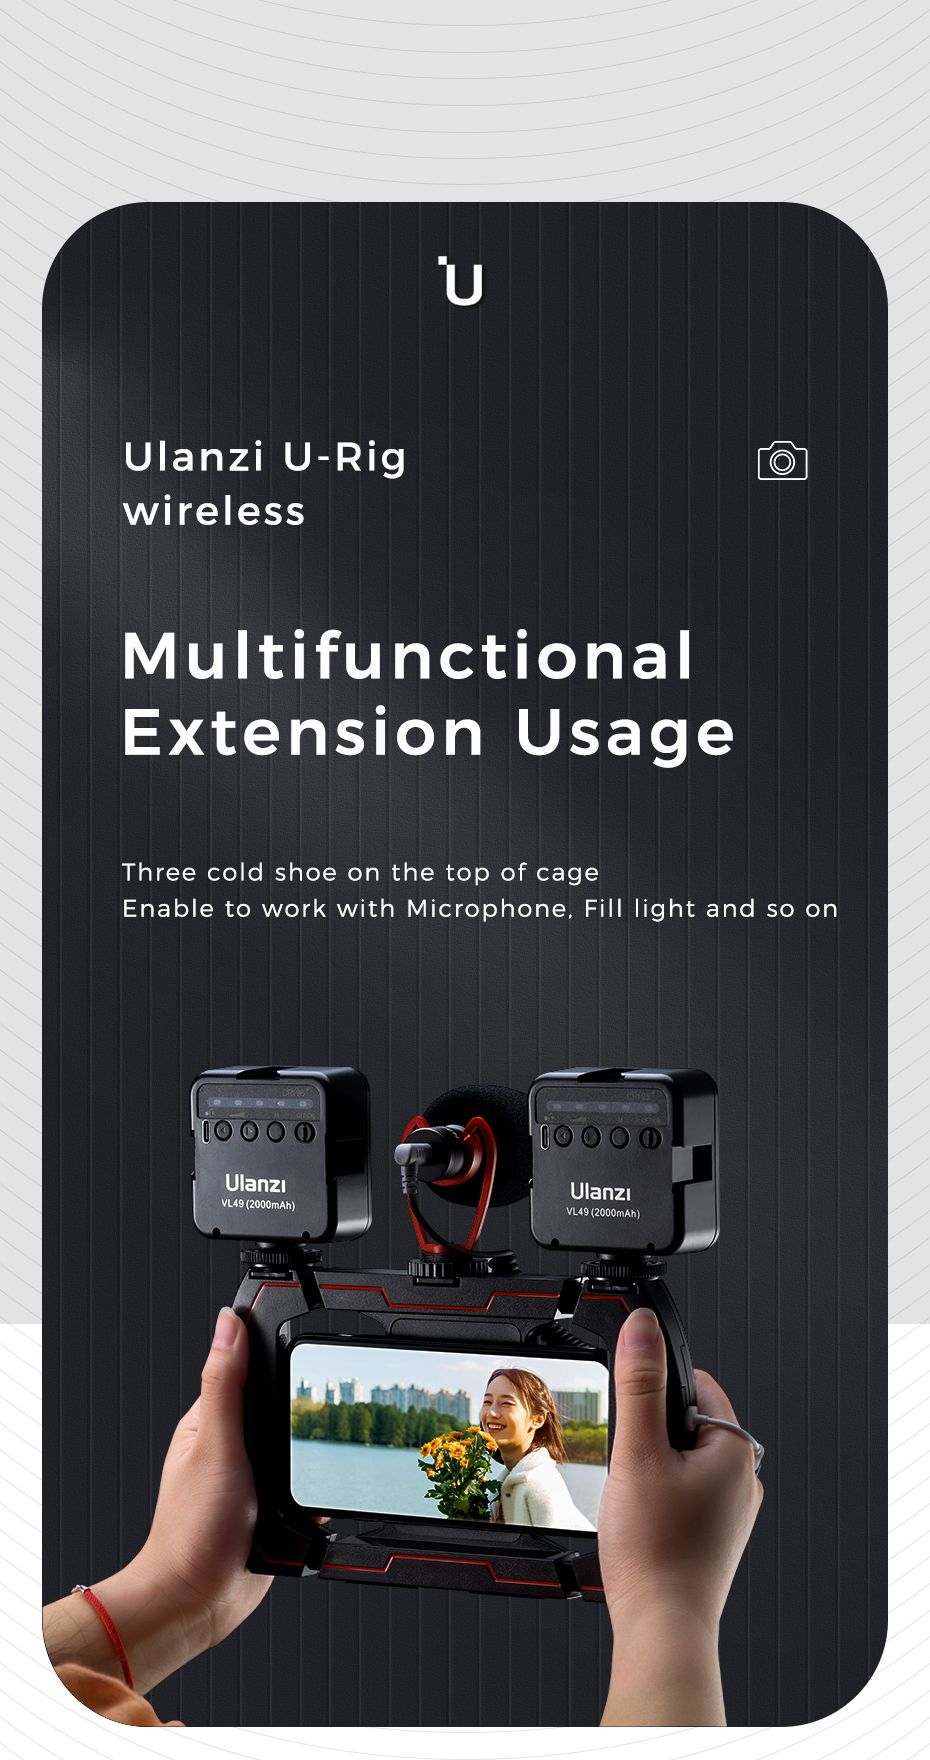 Ulanzi-U-Rig-Wireless-Charging-Handheld-Vlogging-Cage-Smartphone-Video-Rig-with-3-Cold-Shoe-Extensio-1711915